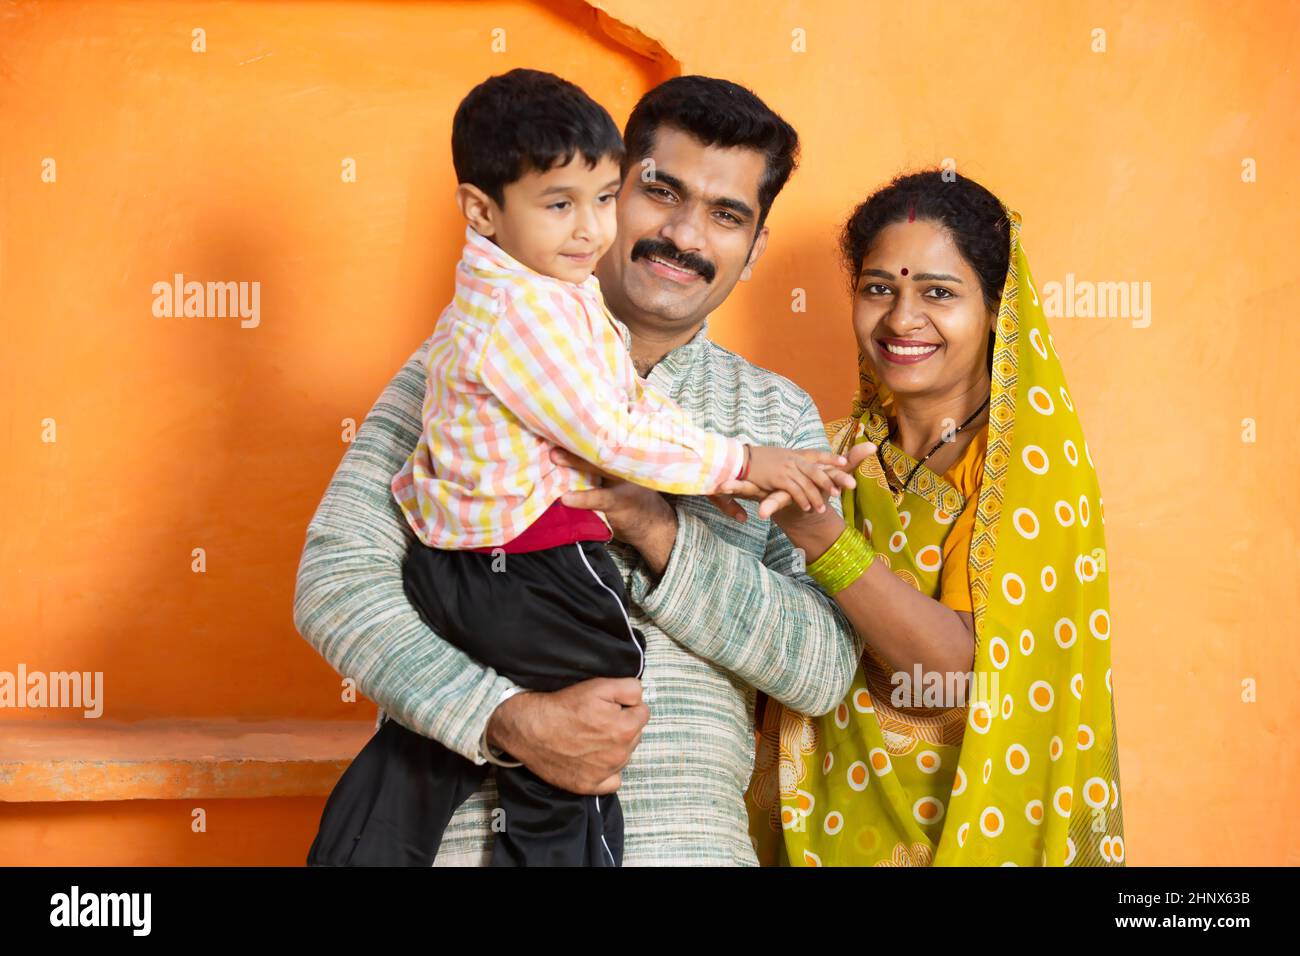 Happy young rural indian family laughing. father holding little child boy and mother wearing sari smiling,Couple wearing traditional cloths with kid. Stock Photo